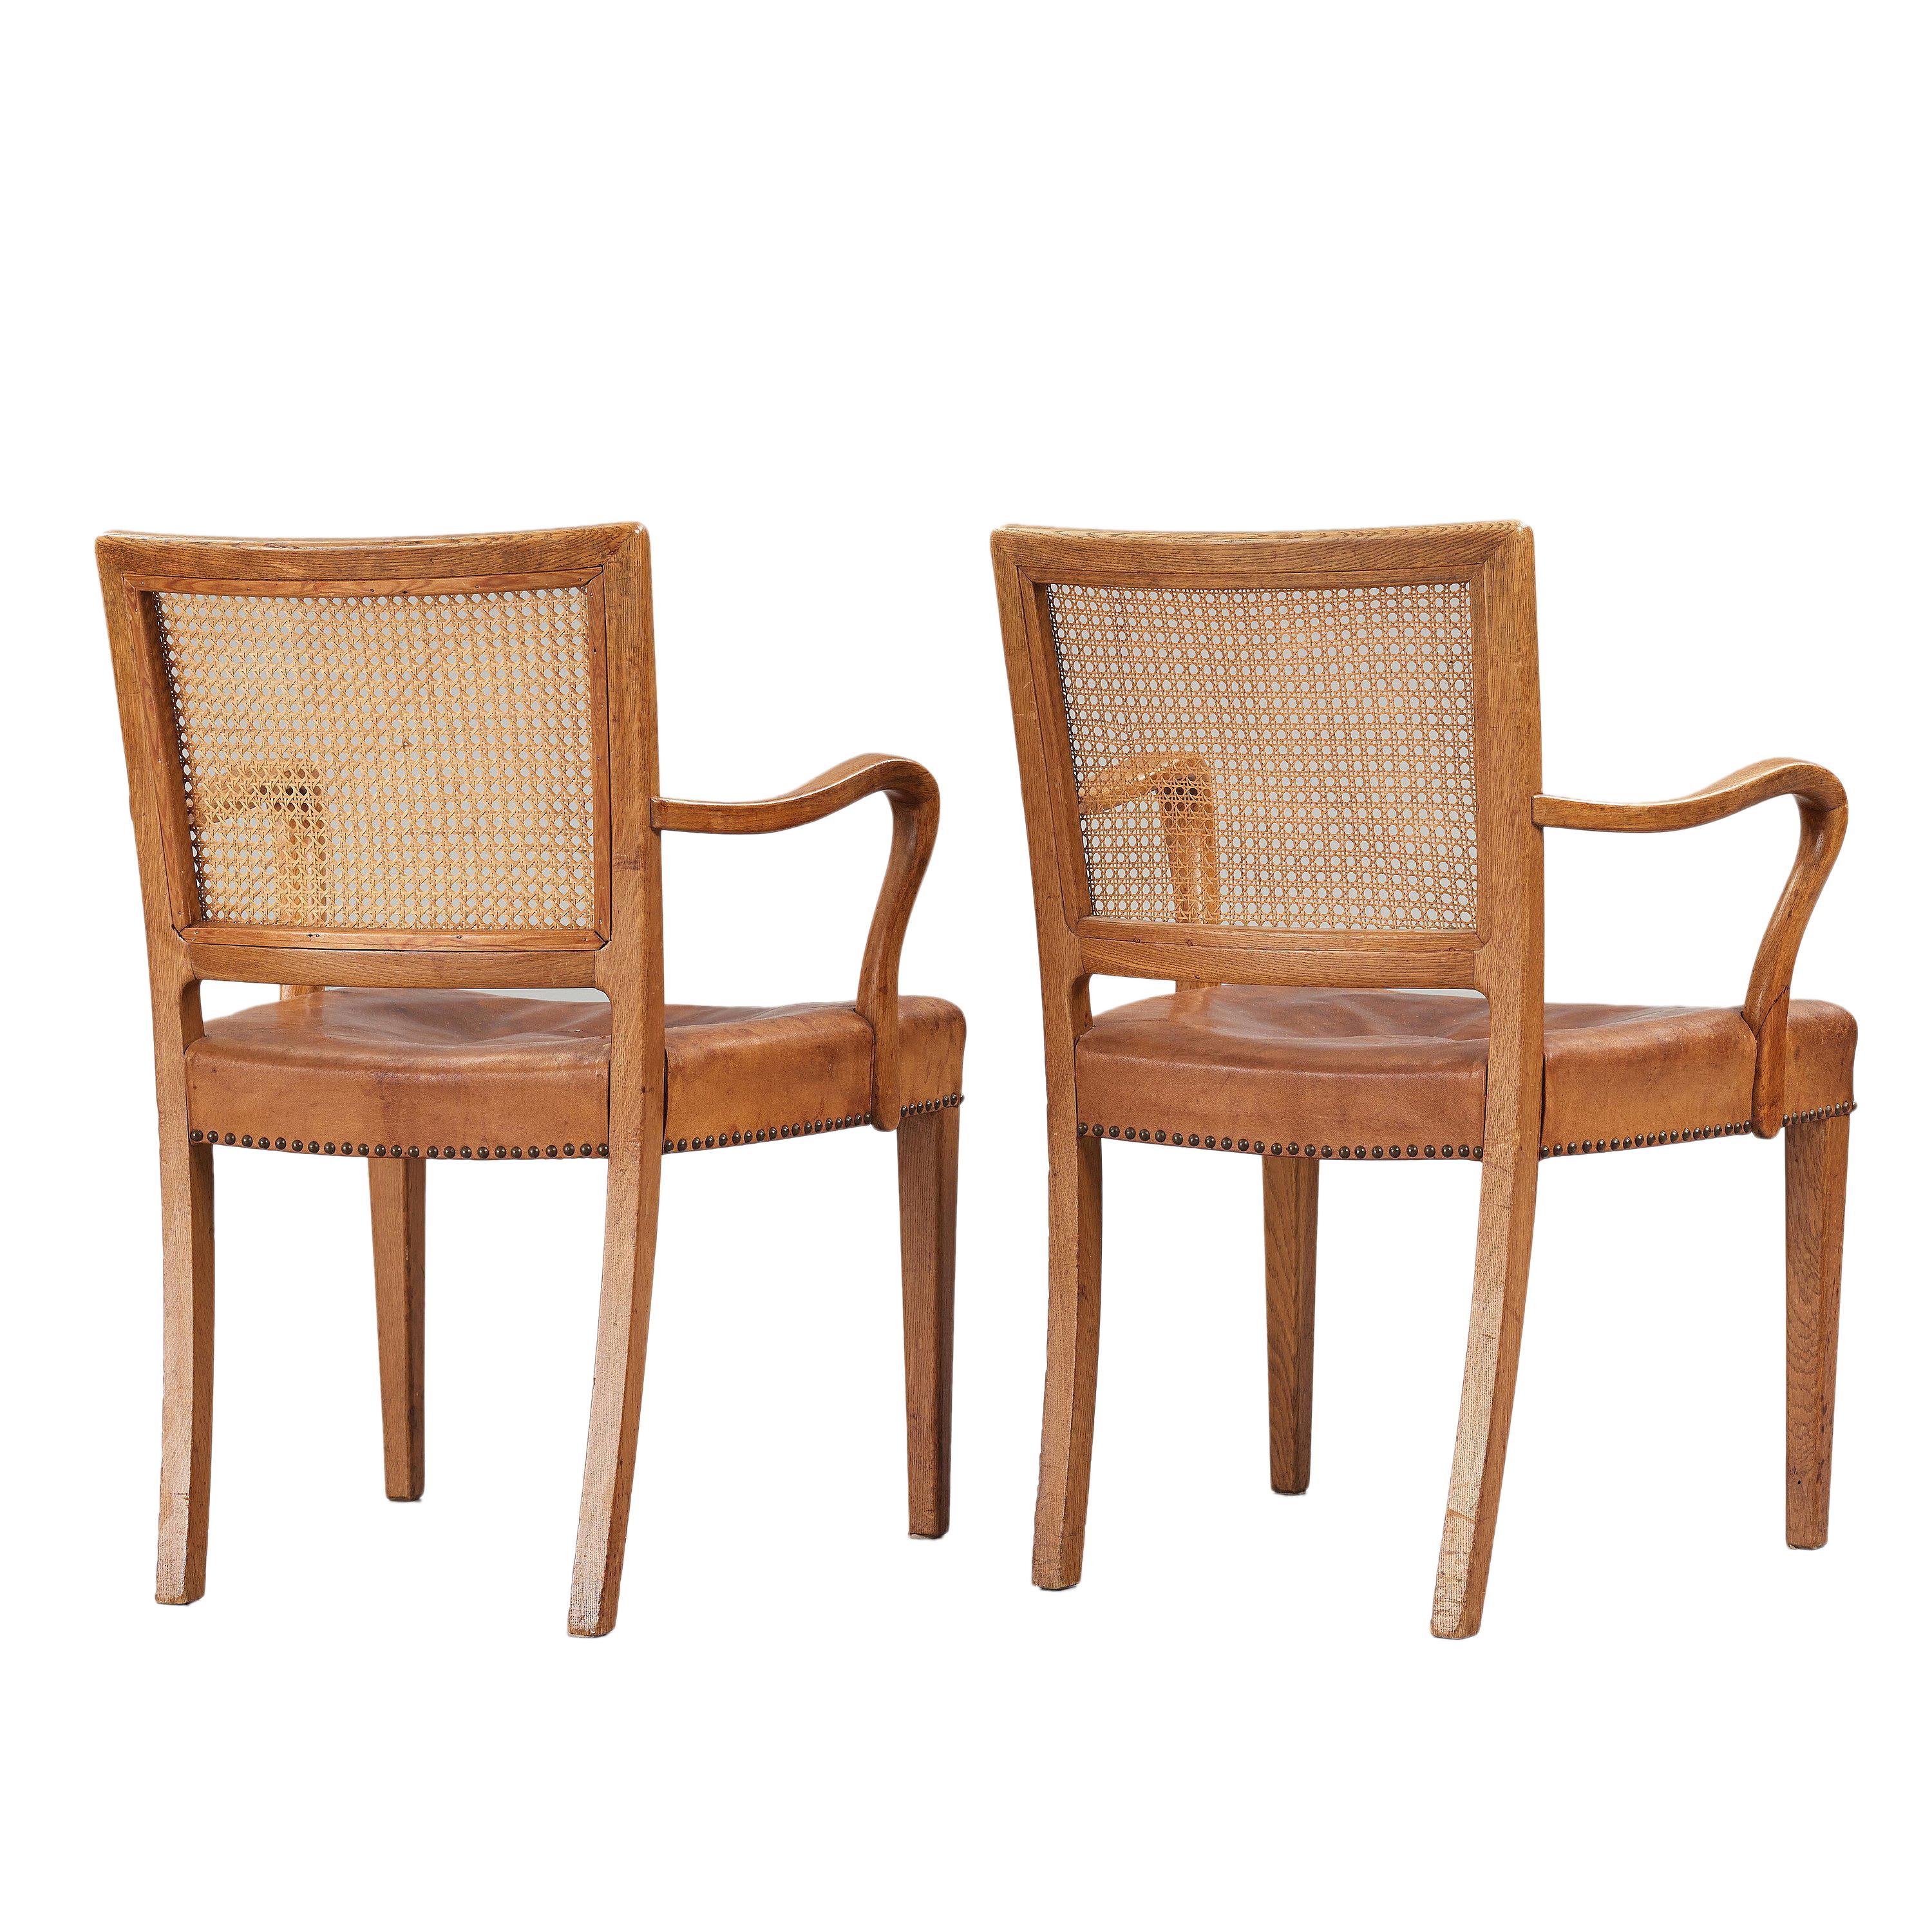 Danish Erik Wørts Set of 12 Dining Chairs in Oak, Cane and Niger Leather, 1945